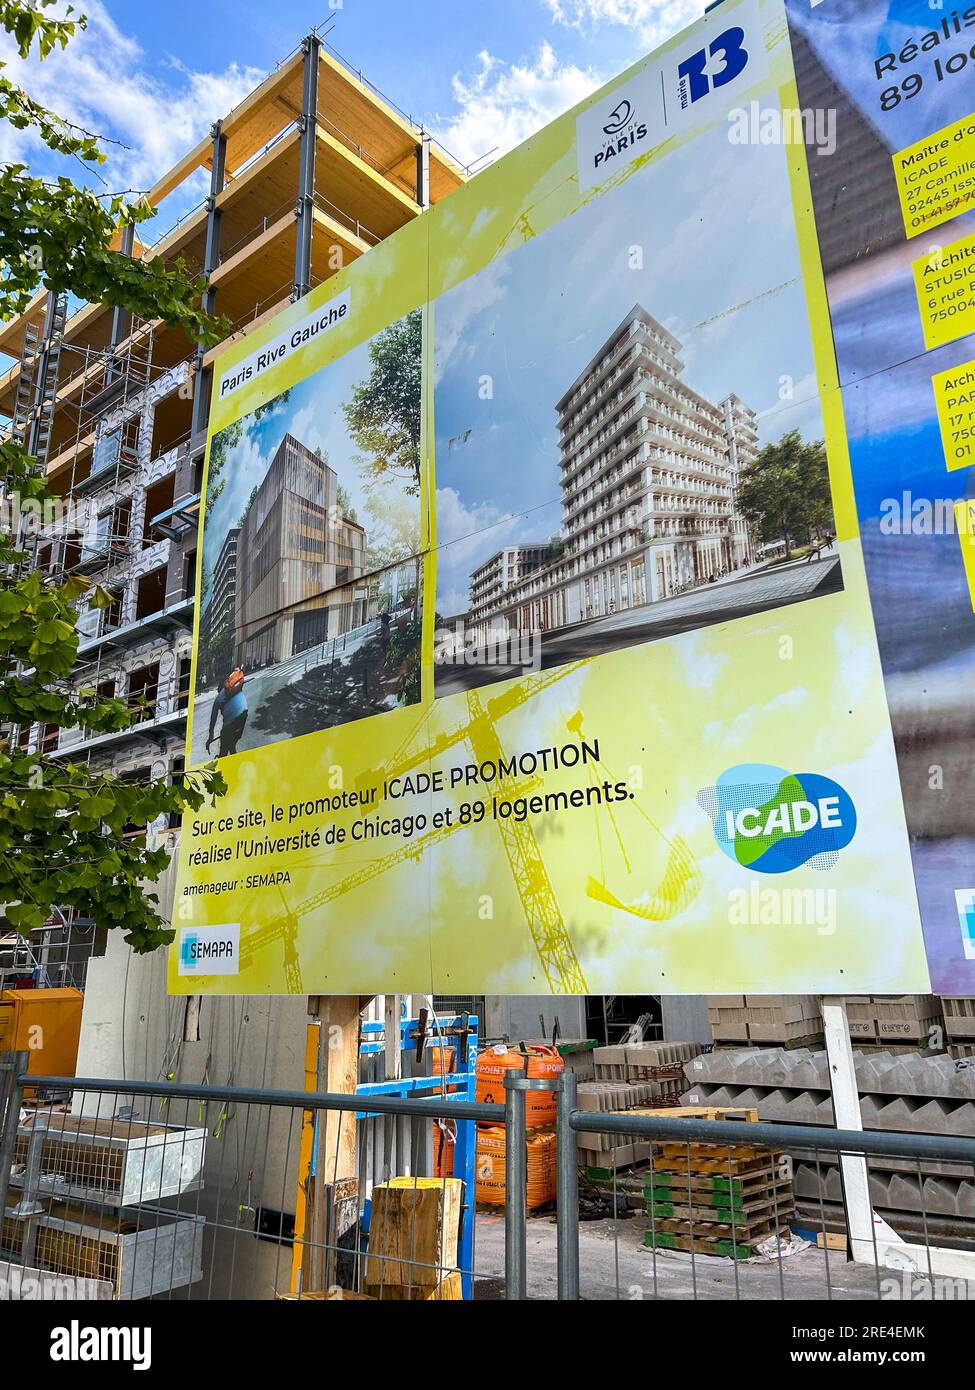 Paris, France, New Construction, University of Chicago, Environmentally Friendly Apartment Buildings in 13th District, housing project Stock Photo